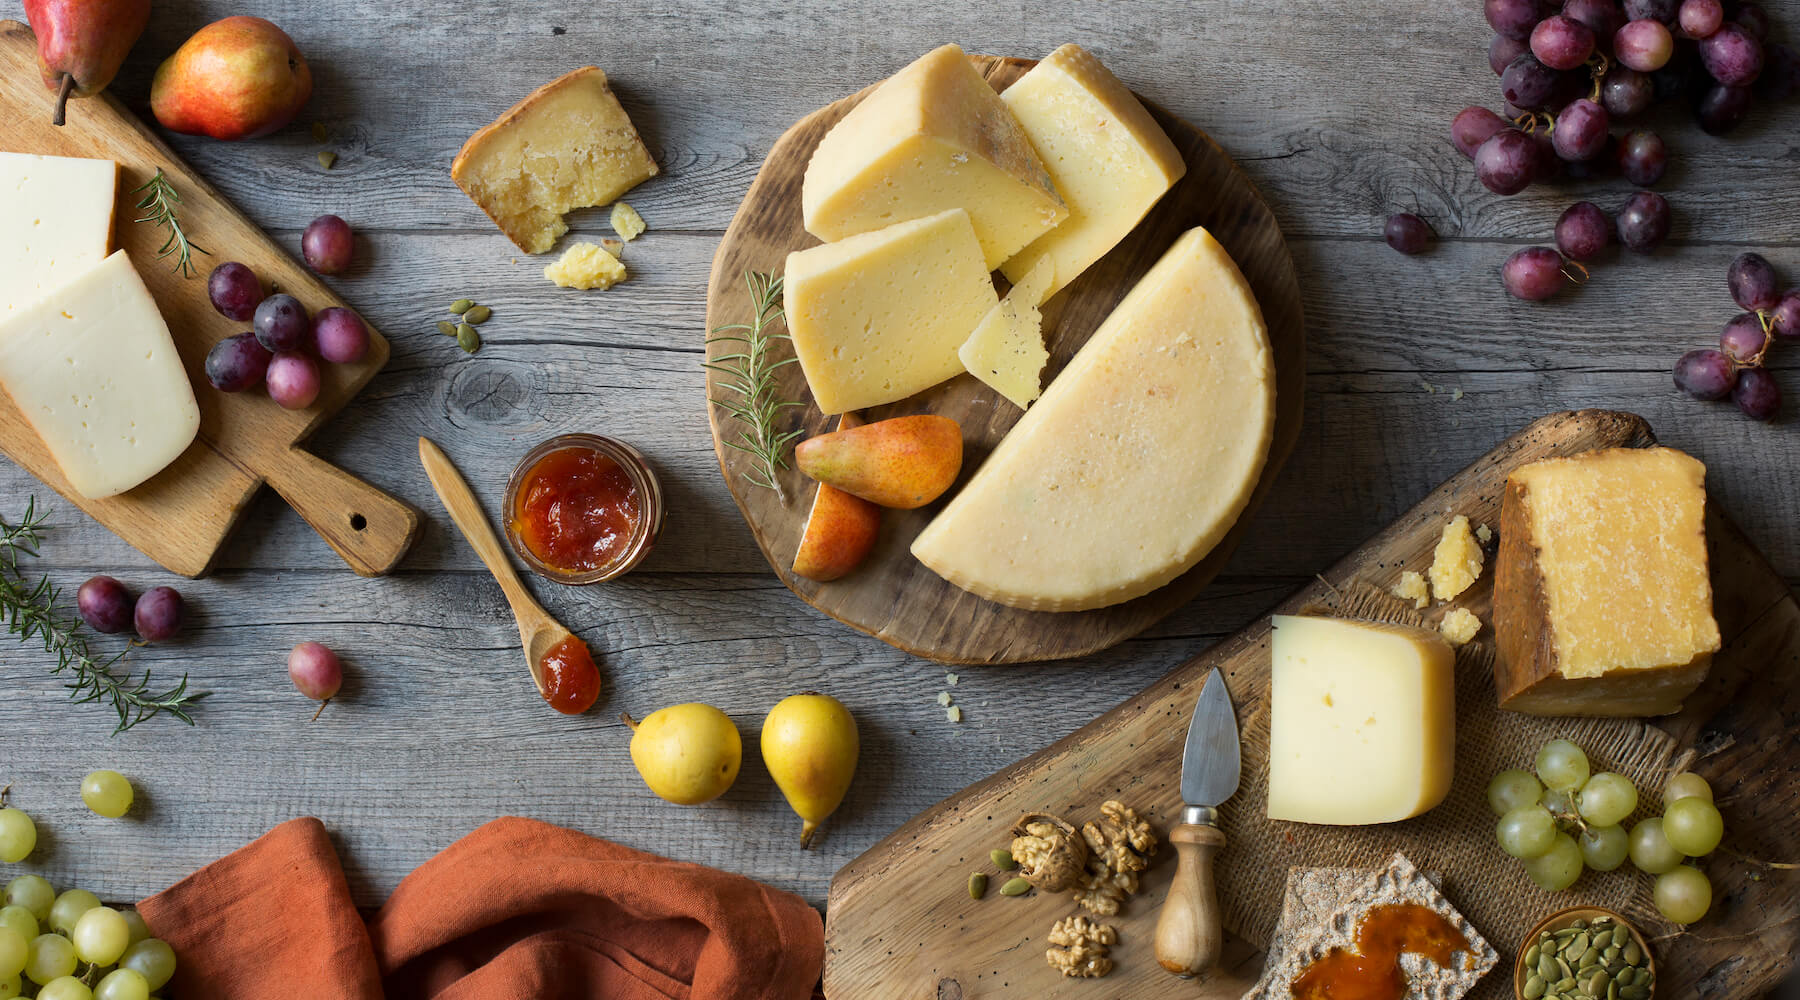 TRADITIONAL CHEESES FROM THE APENNINES